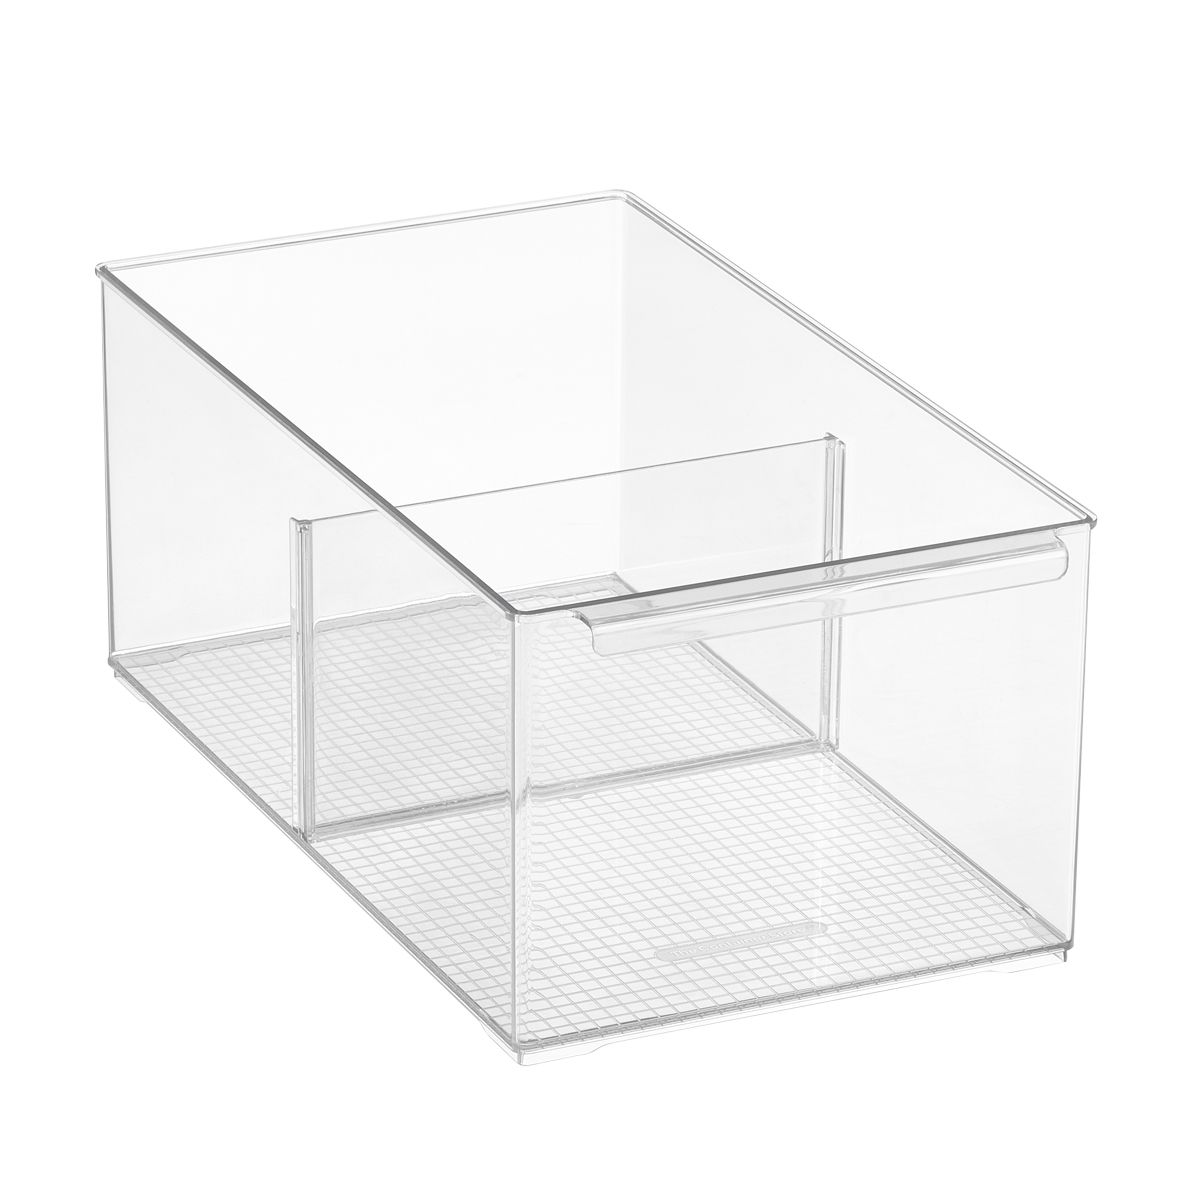 The Everything Organizer Large Shelf Depth Pantry Bin w/ Divider | The Container Store